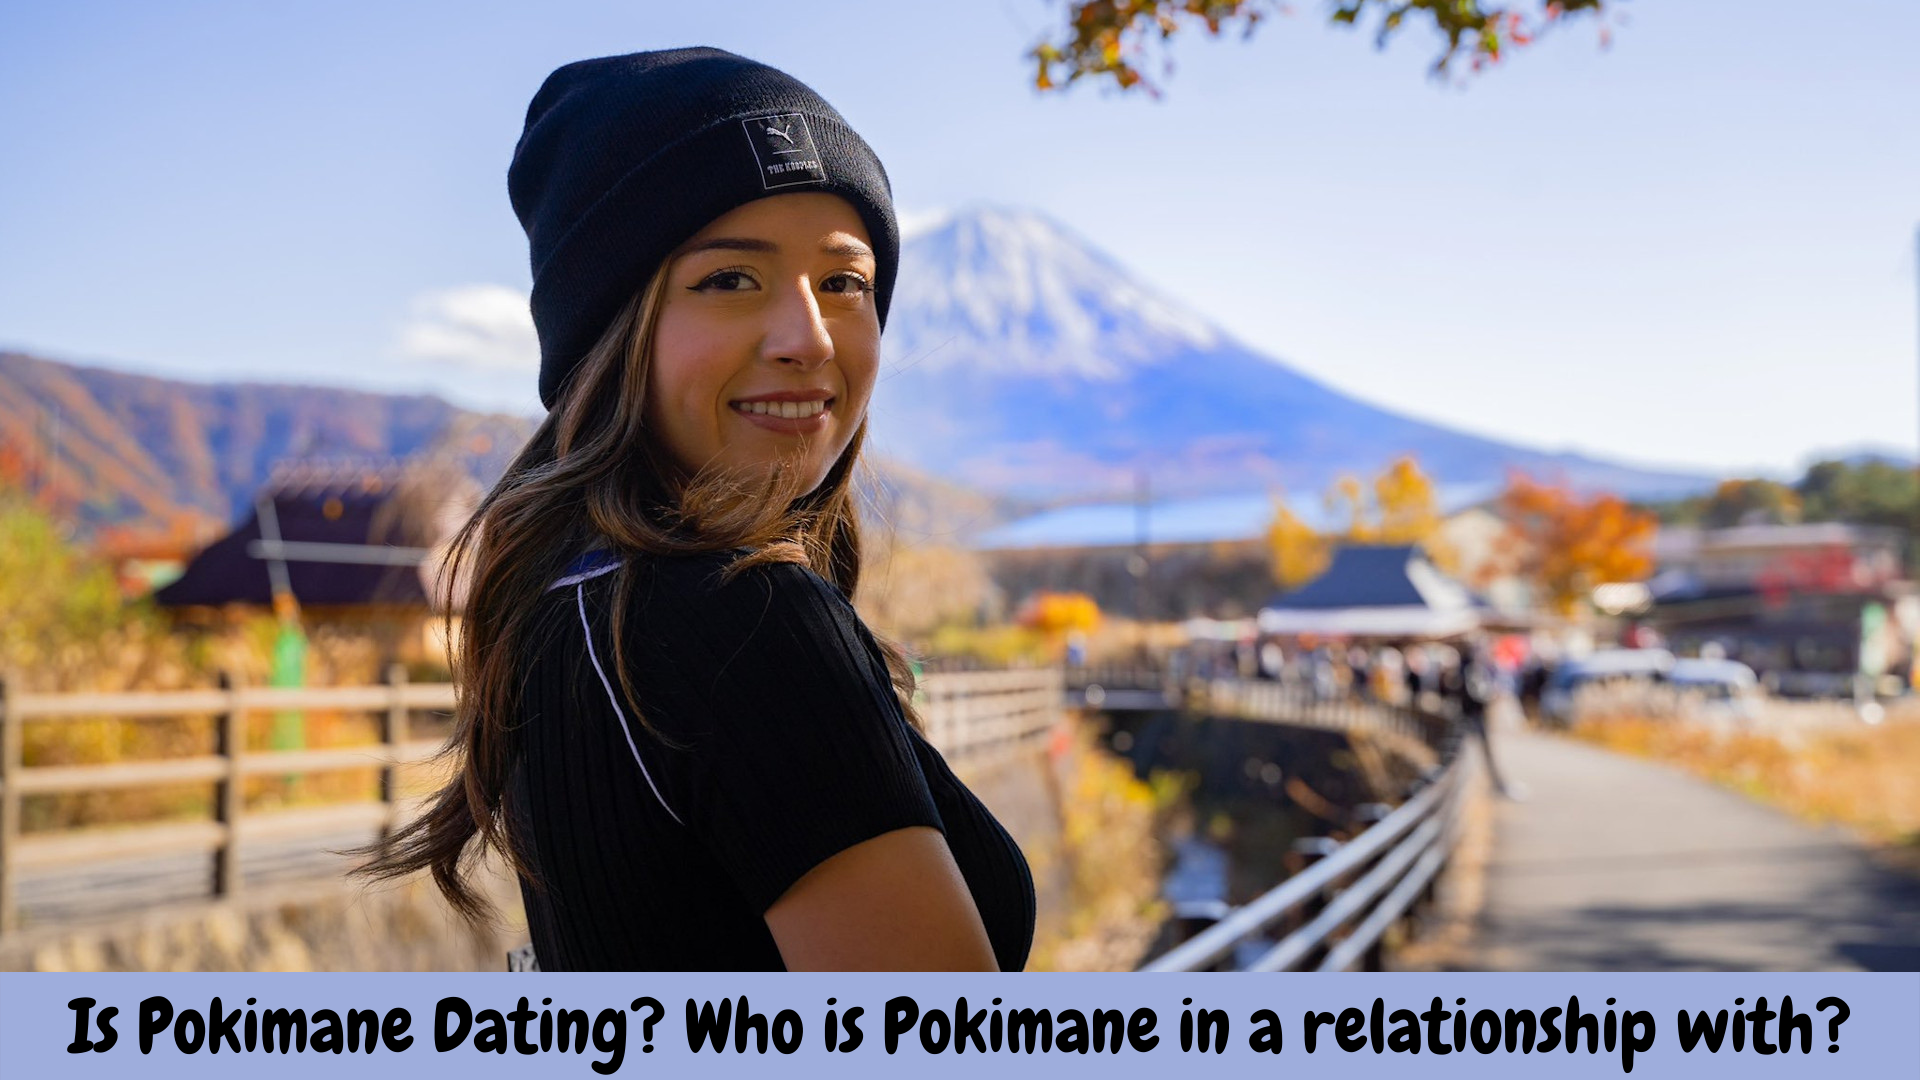 Is Pokimane Dating? Who is Pokimane in a relationship with?